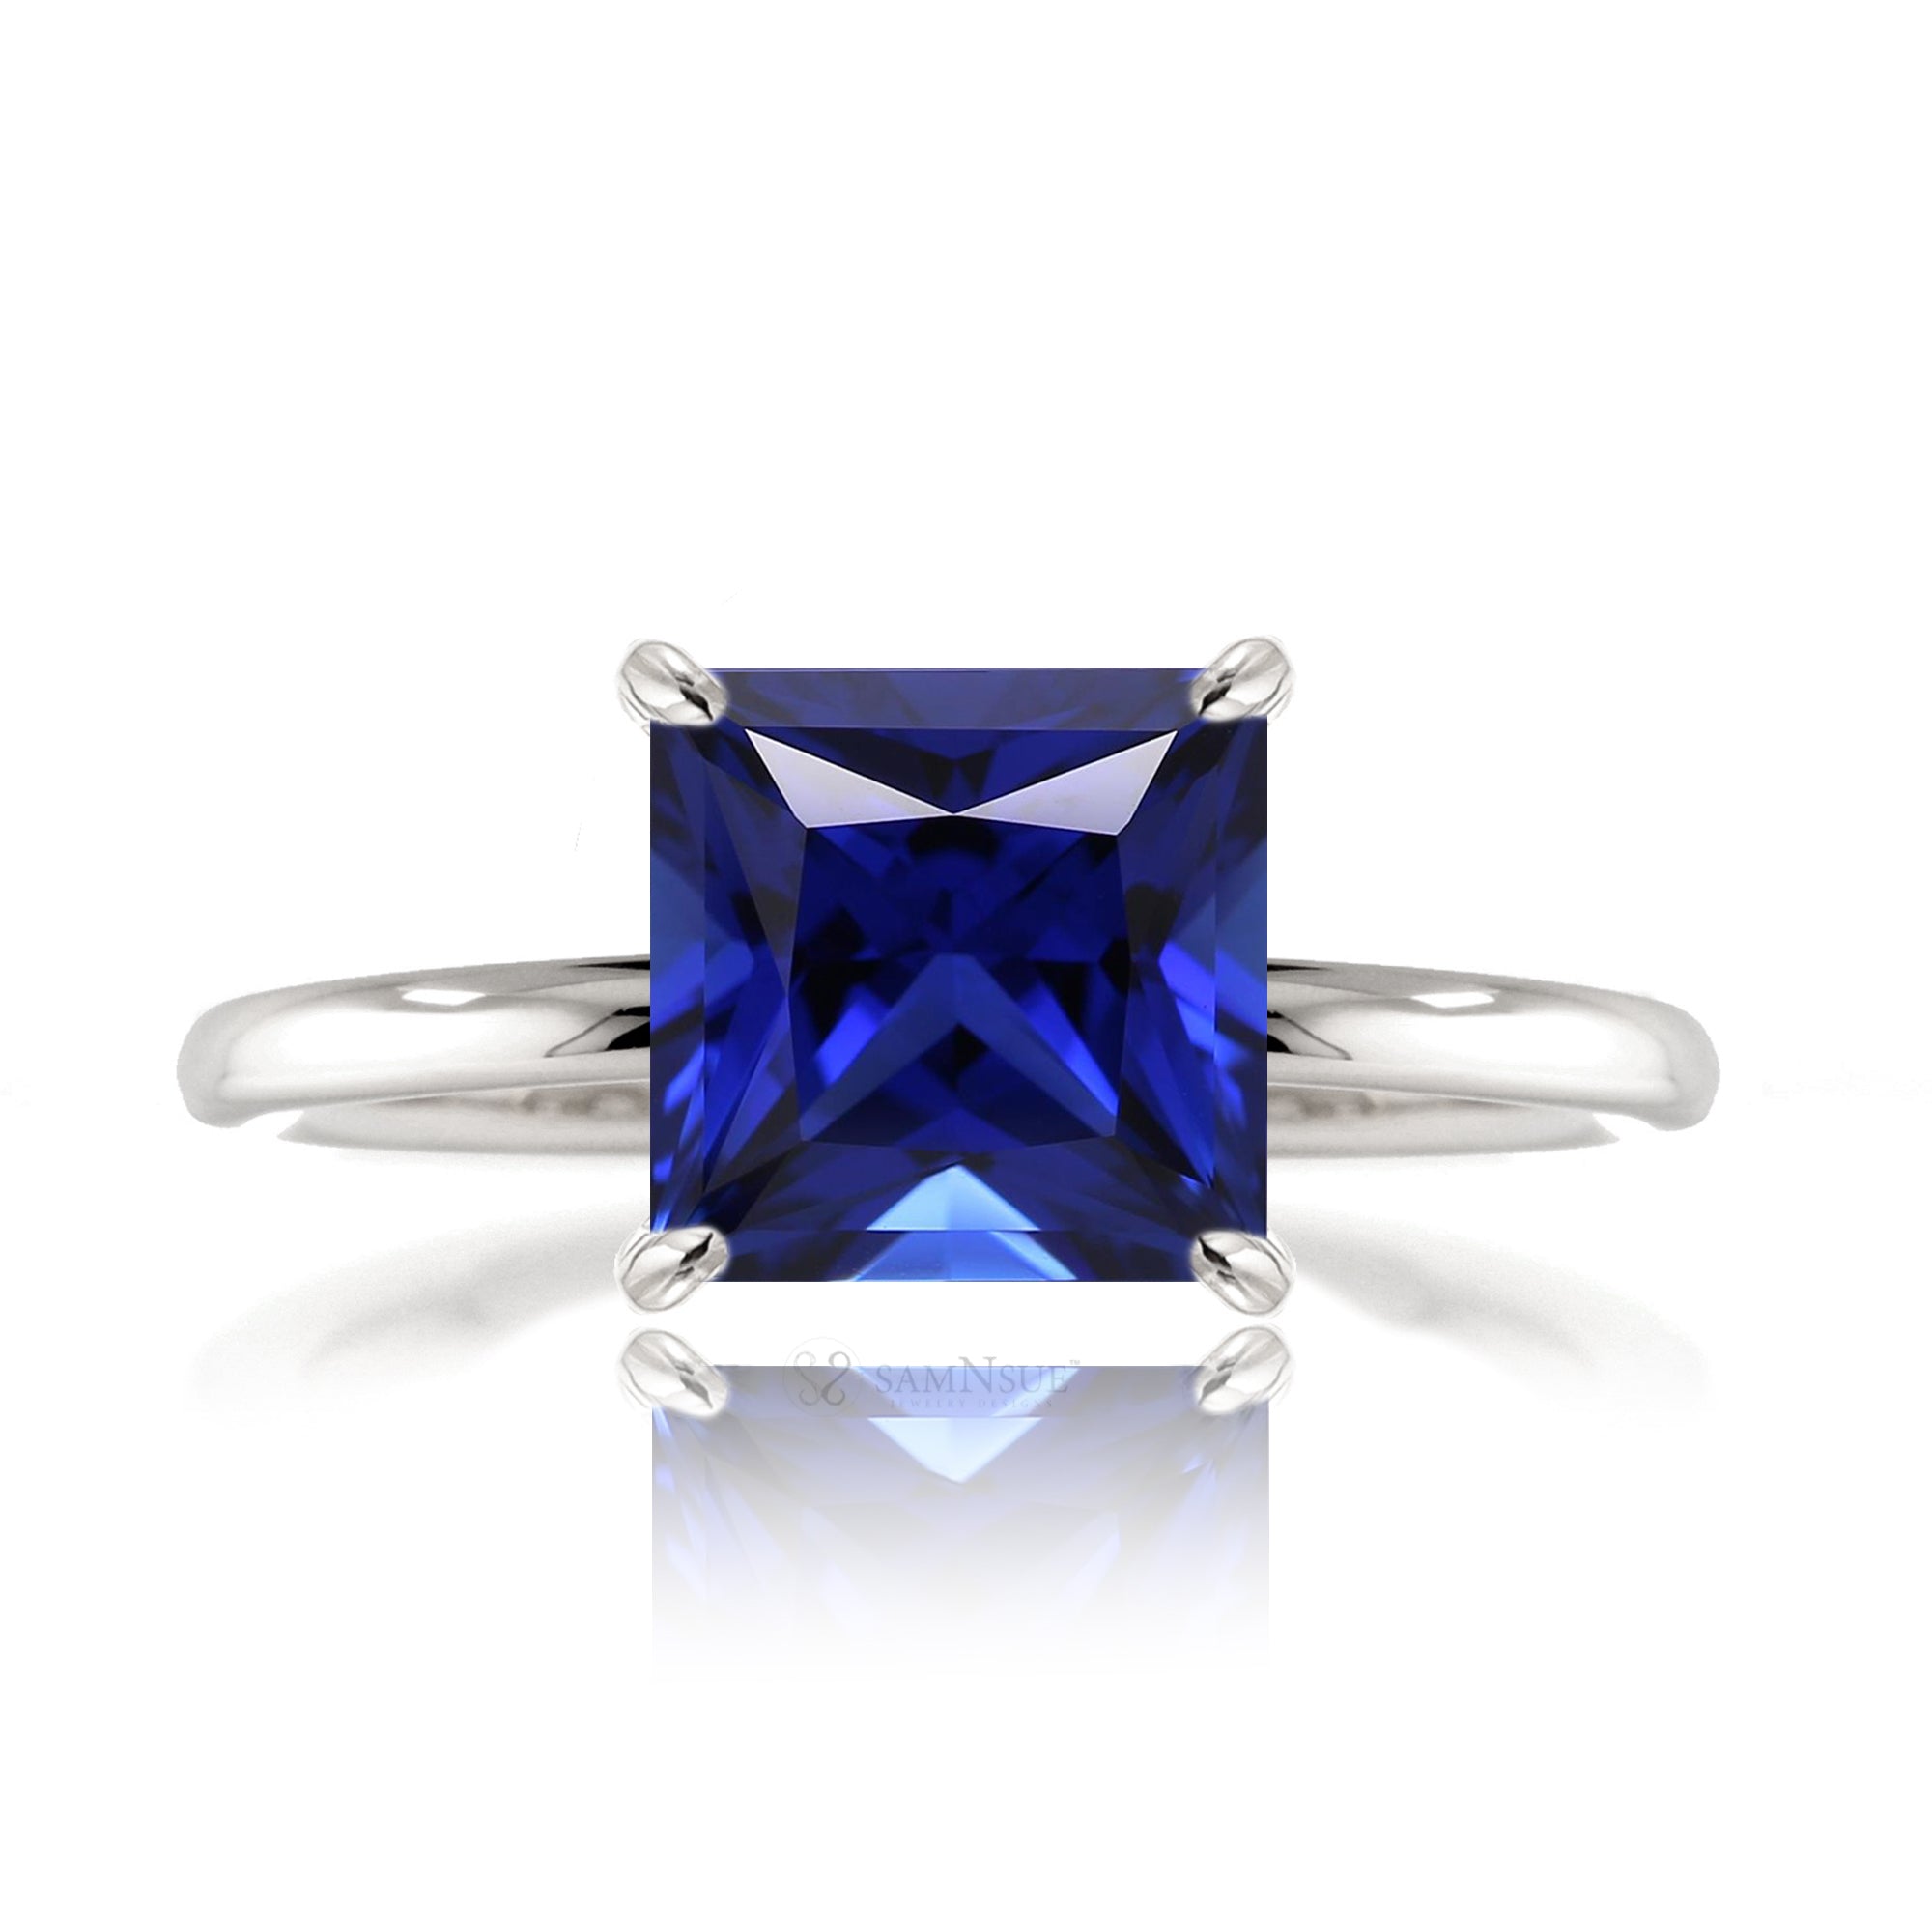 Princess cut blue sapphire diamond engagement ring white gold solid band - the Ava